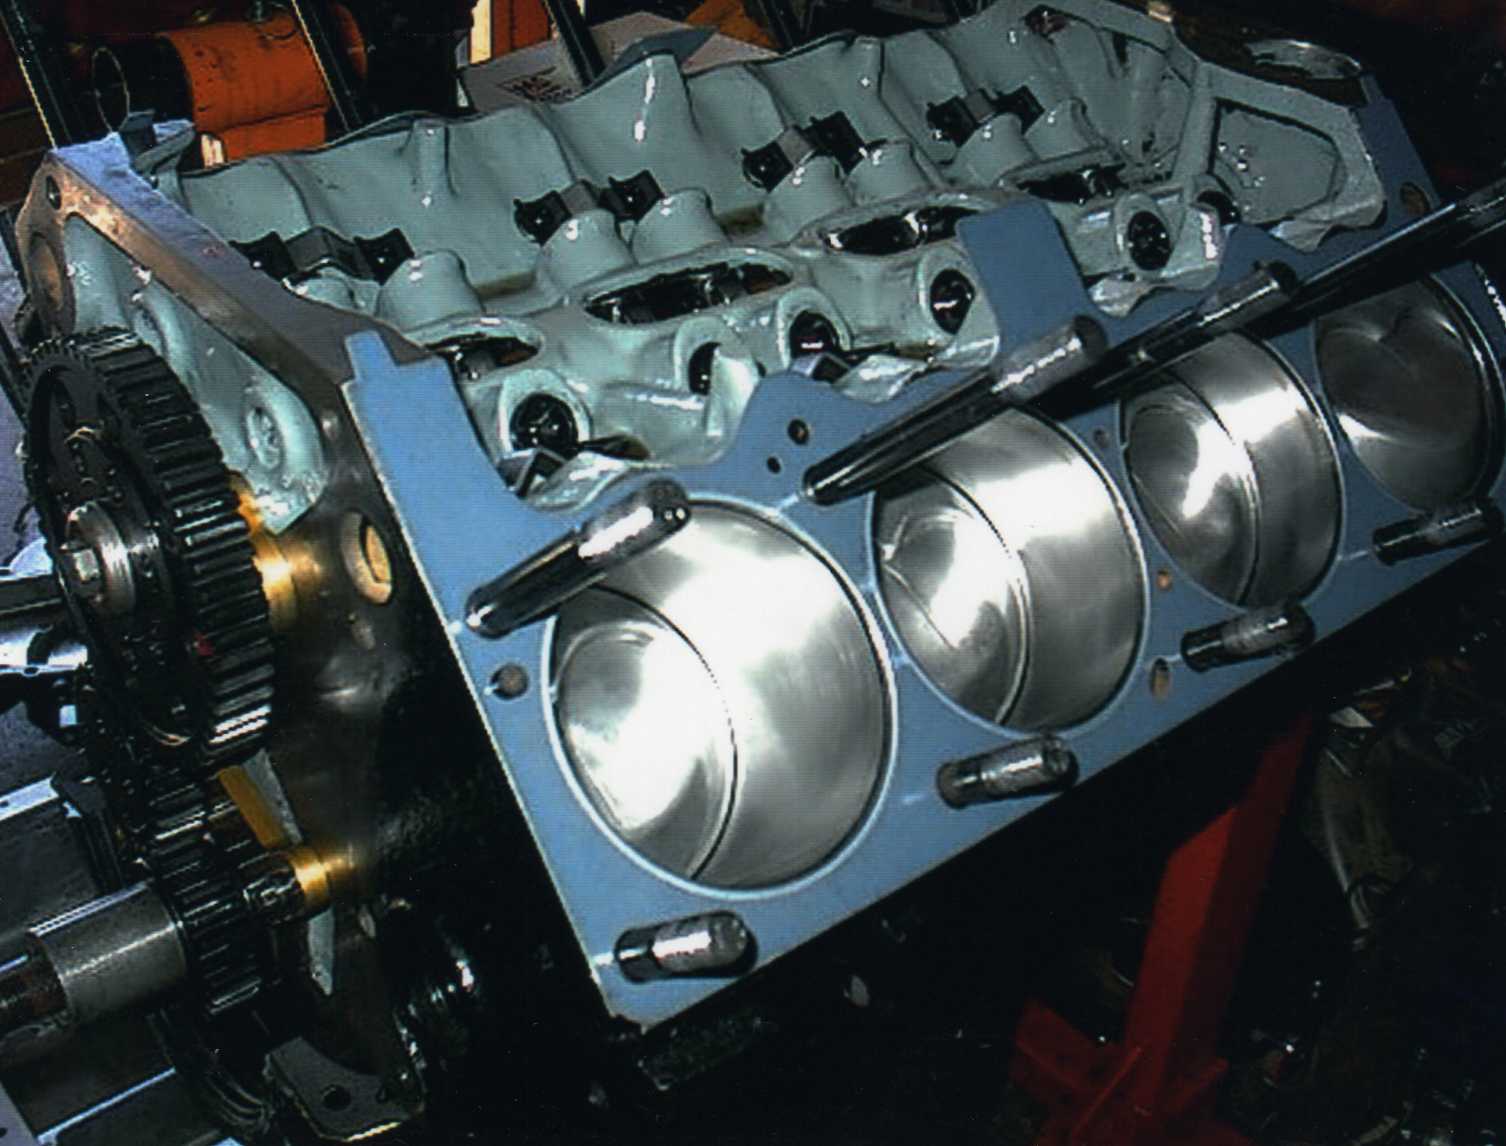 The 'fresh' motor showing perfect cylinders.